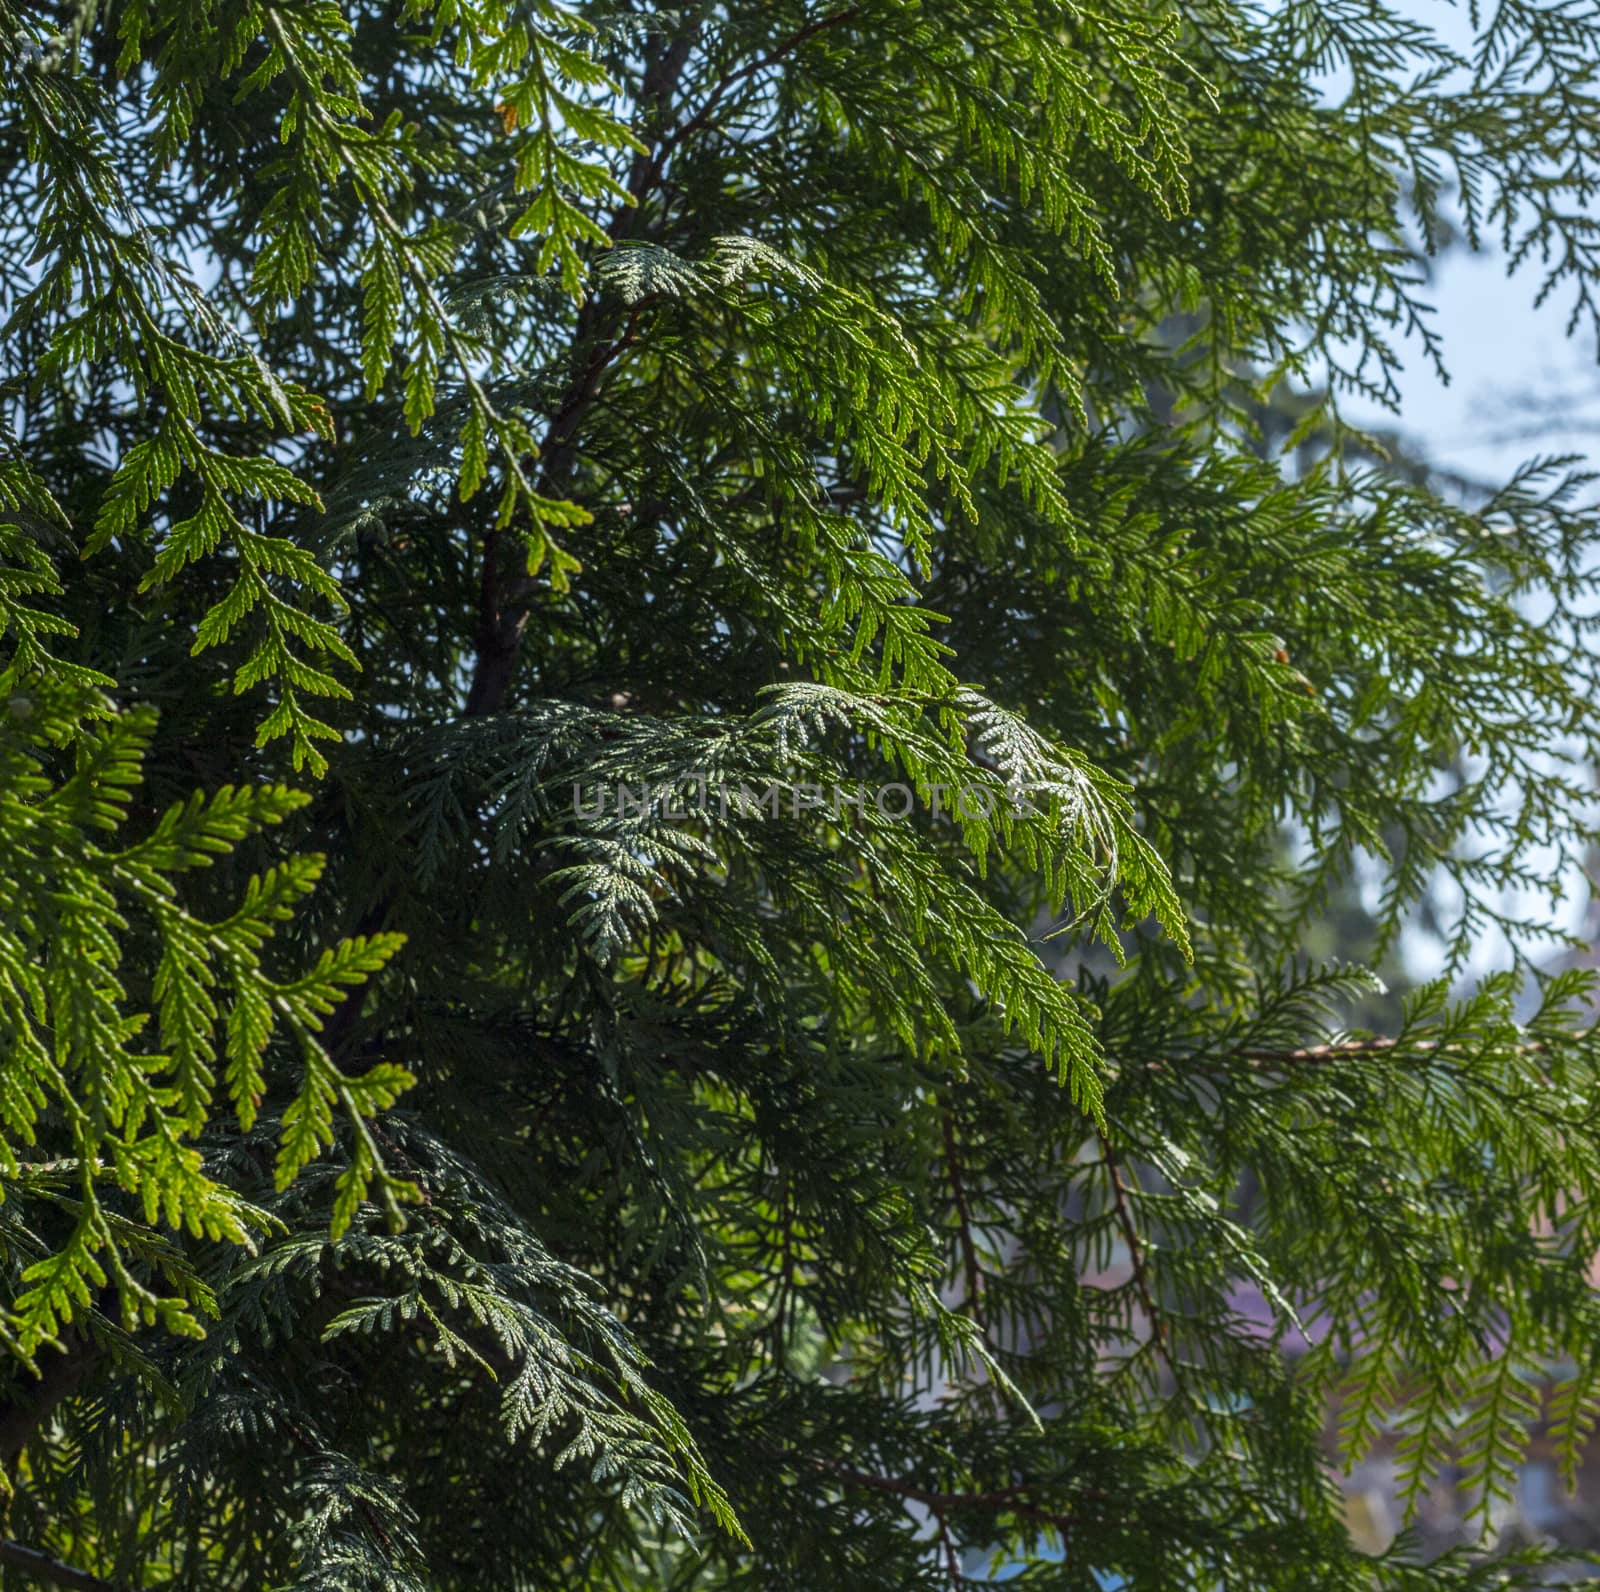 Branches Thuja background green tree. For your commercial and editorial use.